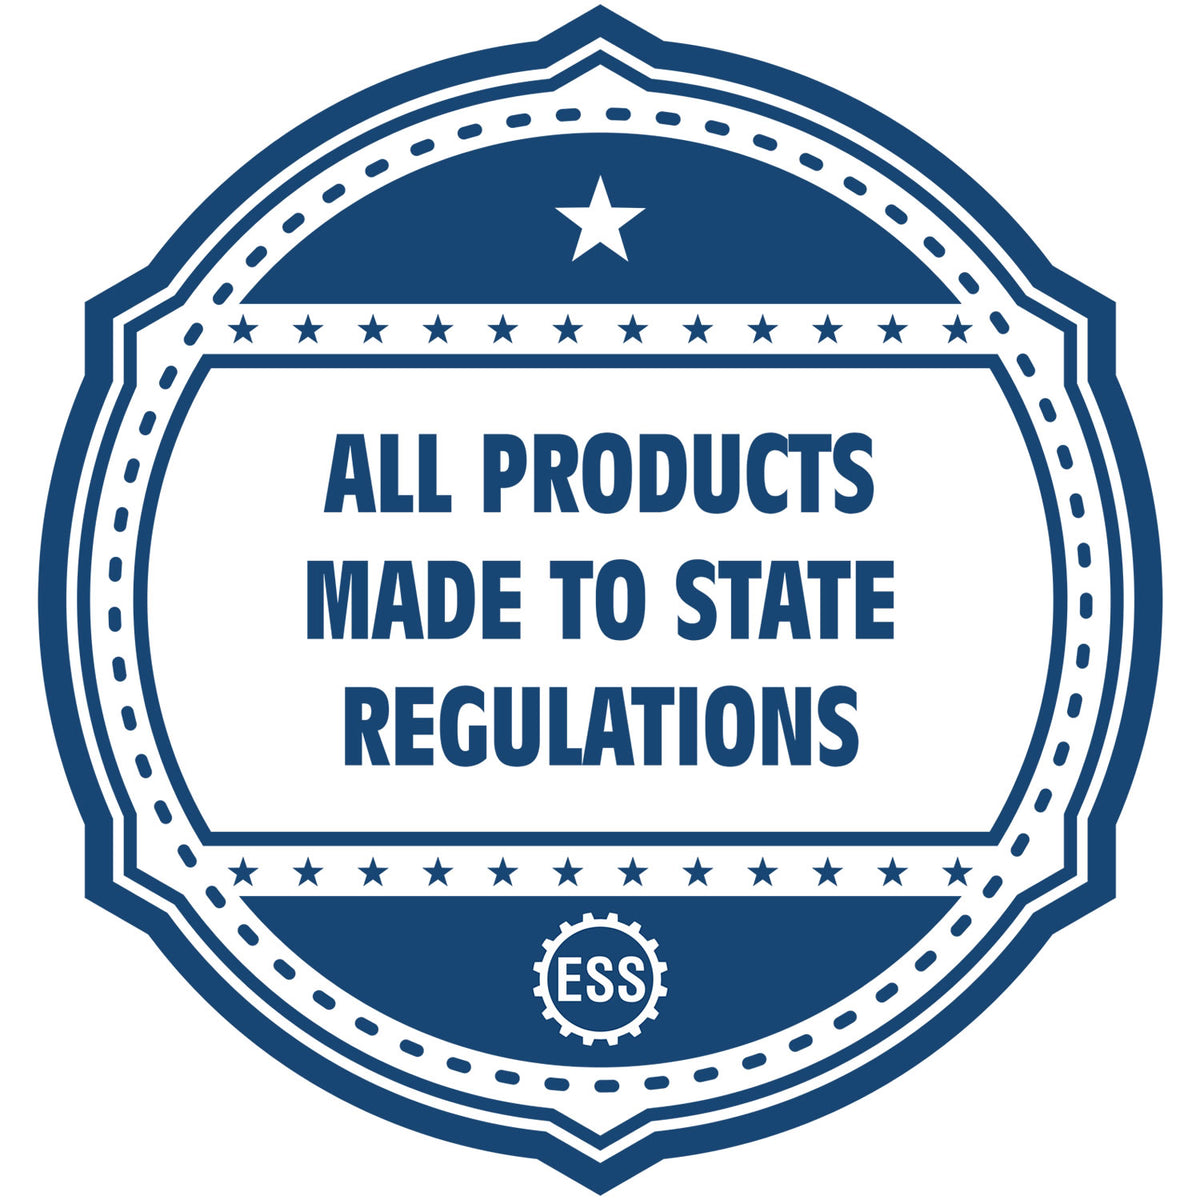 An icon or badge element for the Handheld Virginia Professional Engineer Embosser showing that this product is made in compliance with state regulations.